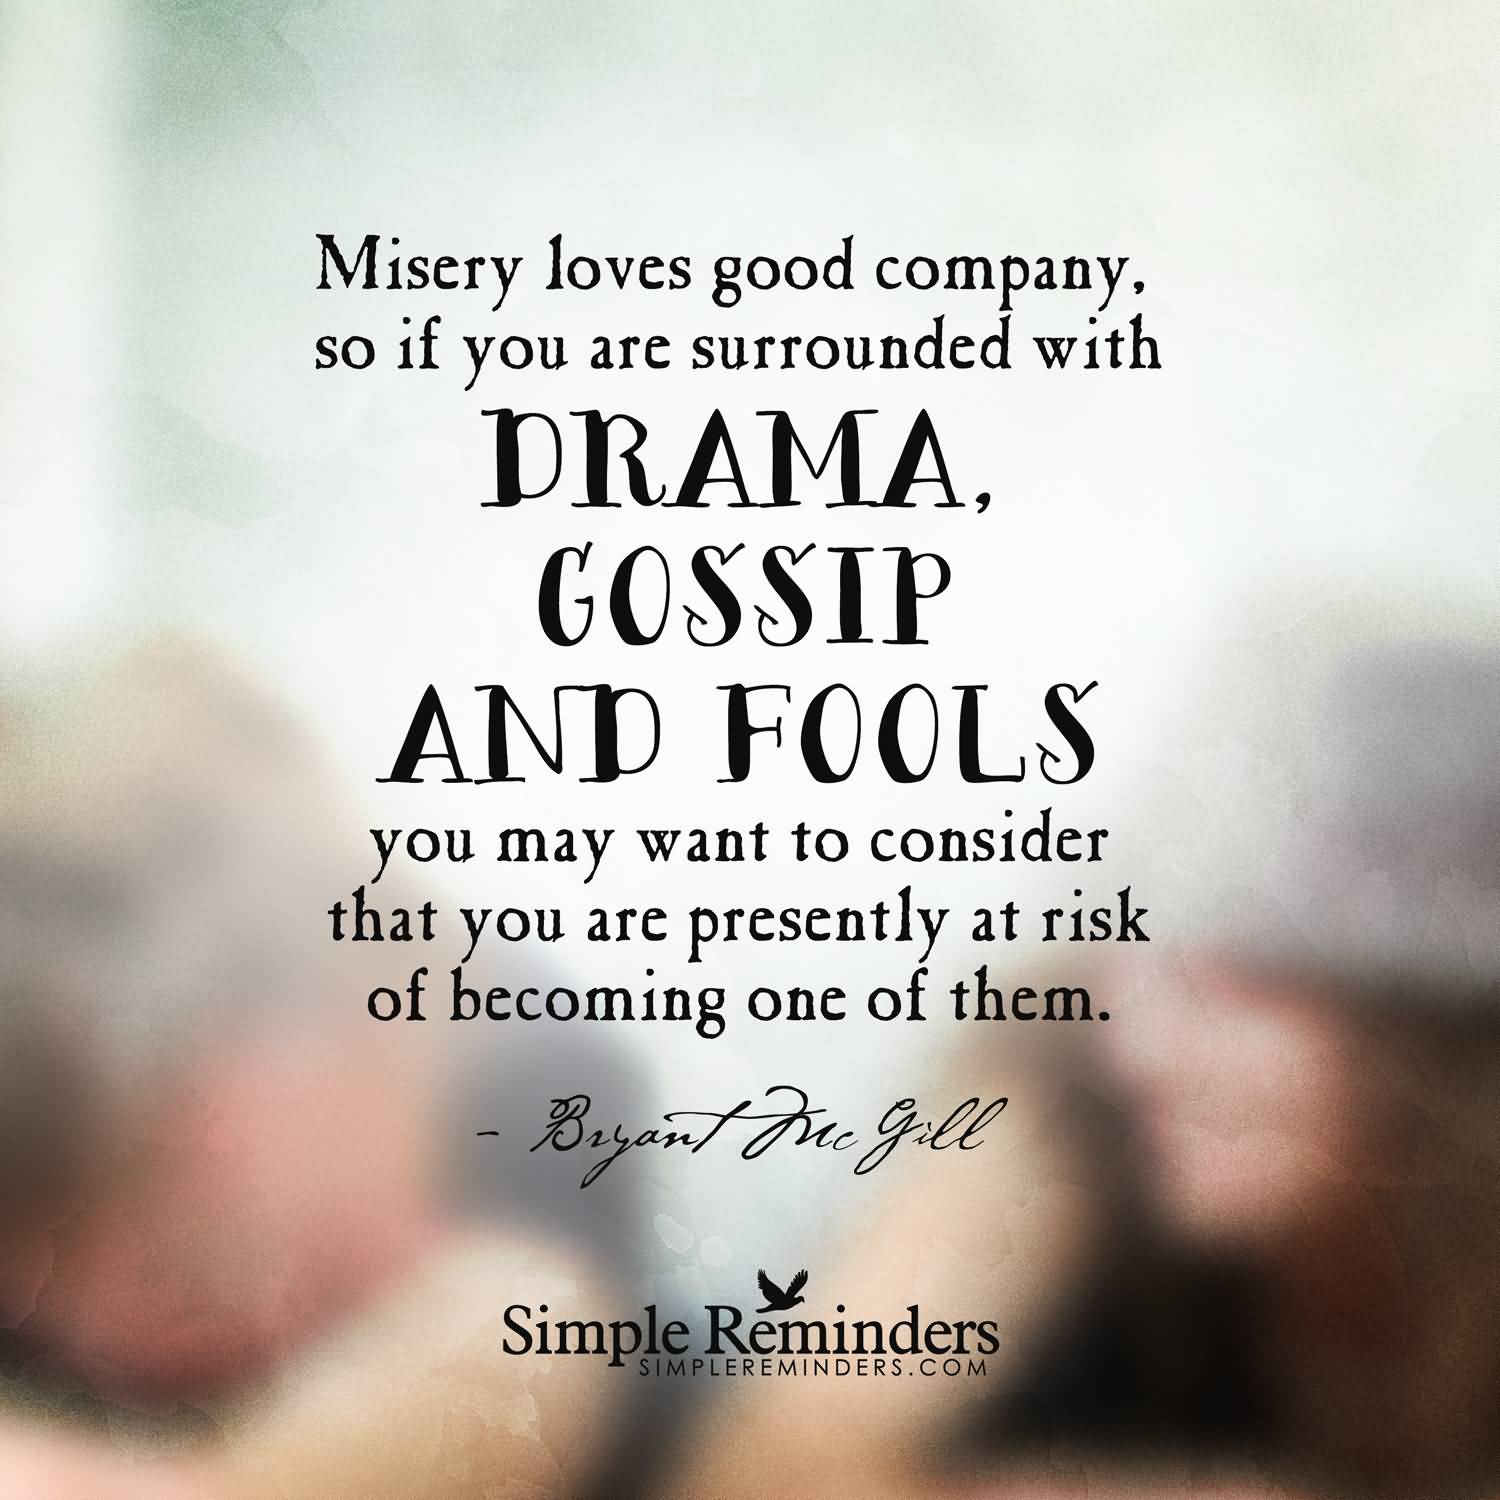 Misery loves good company, so if you are surrounded with drama, gossip and fools you may want to consider that you are presently at ... Bryant McGill